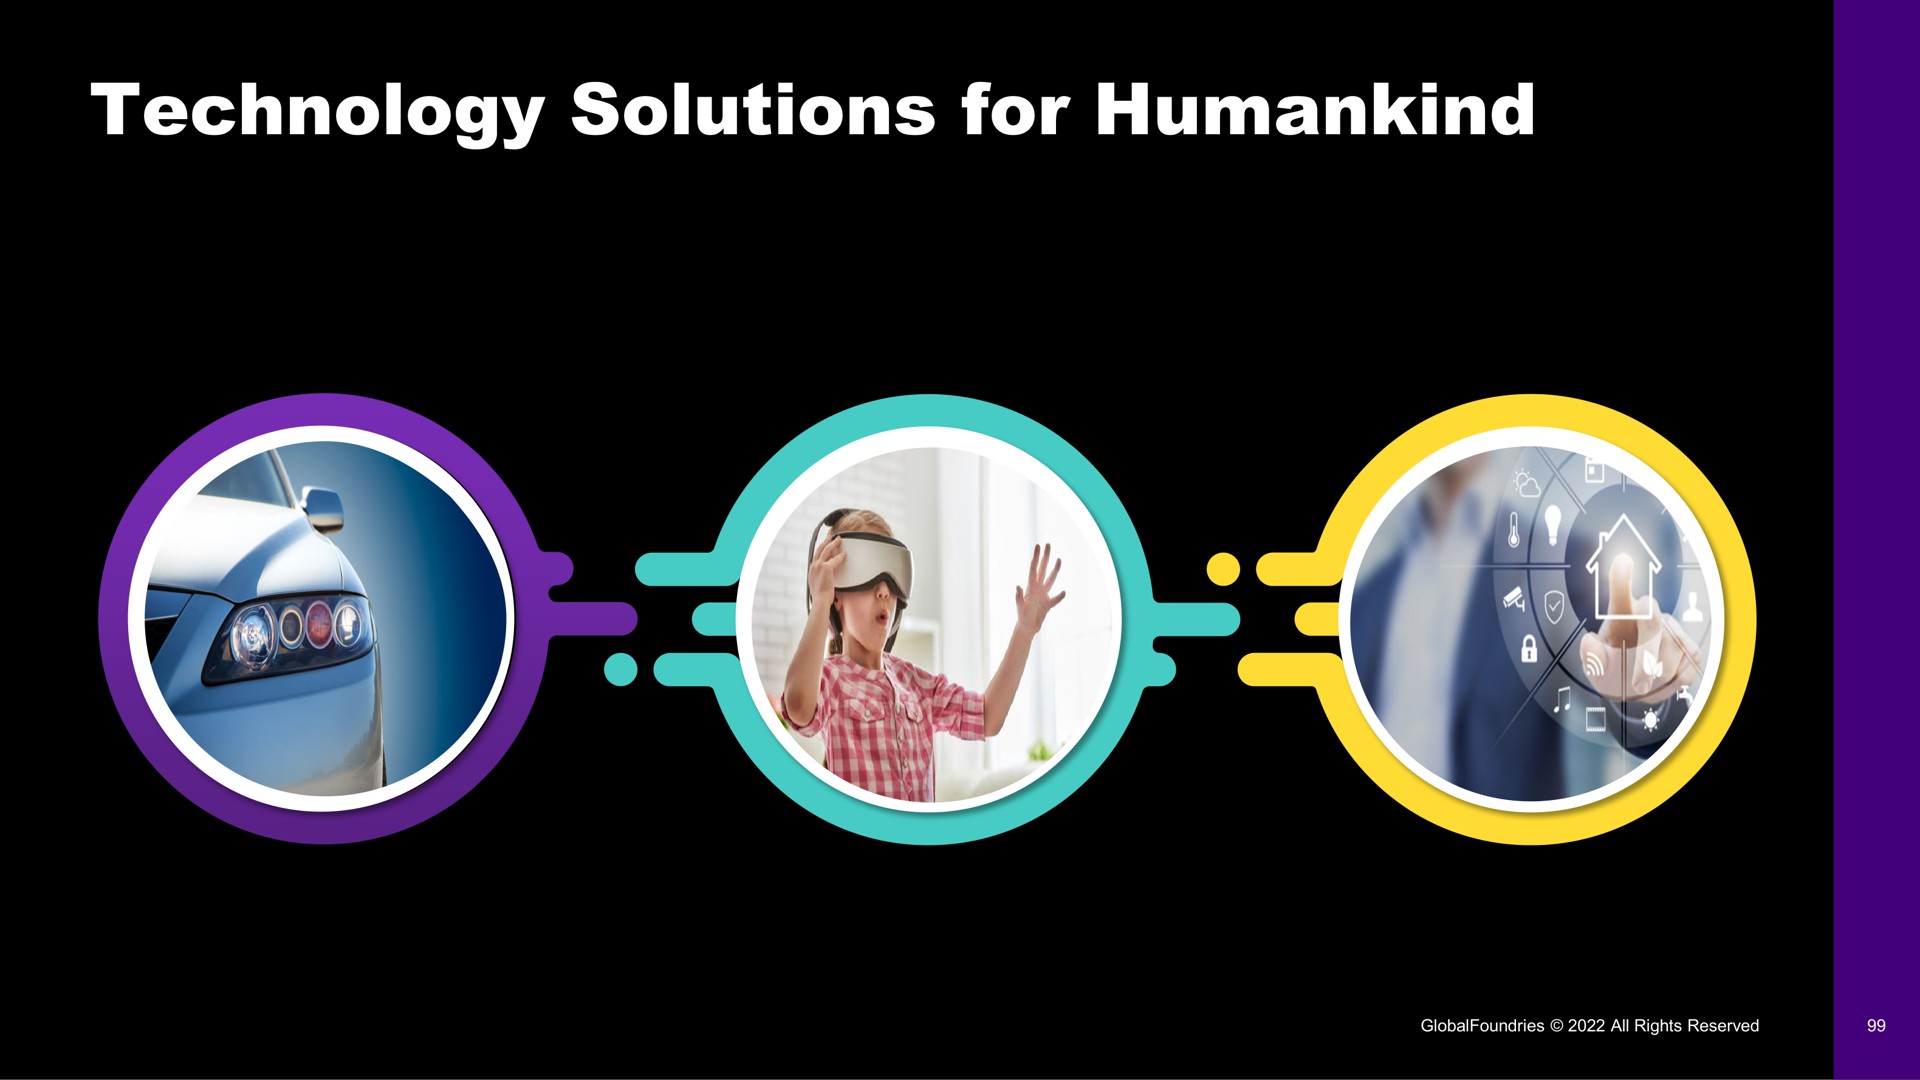 technology solutions for humankind | GlobalFoundries